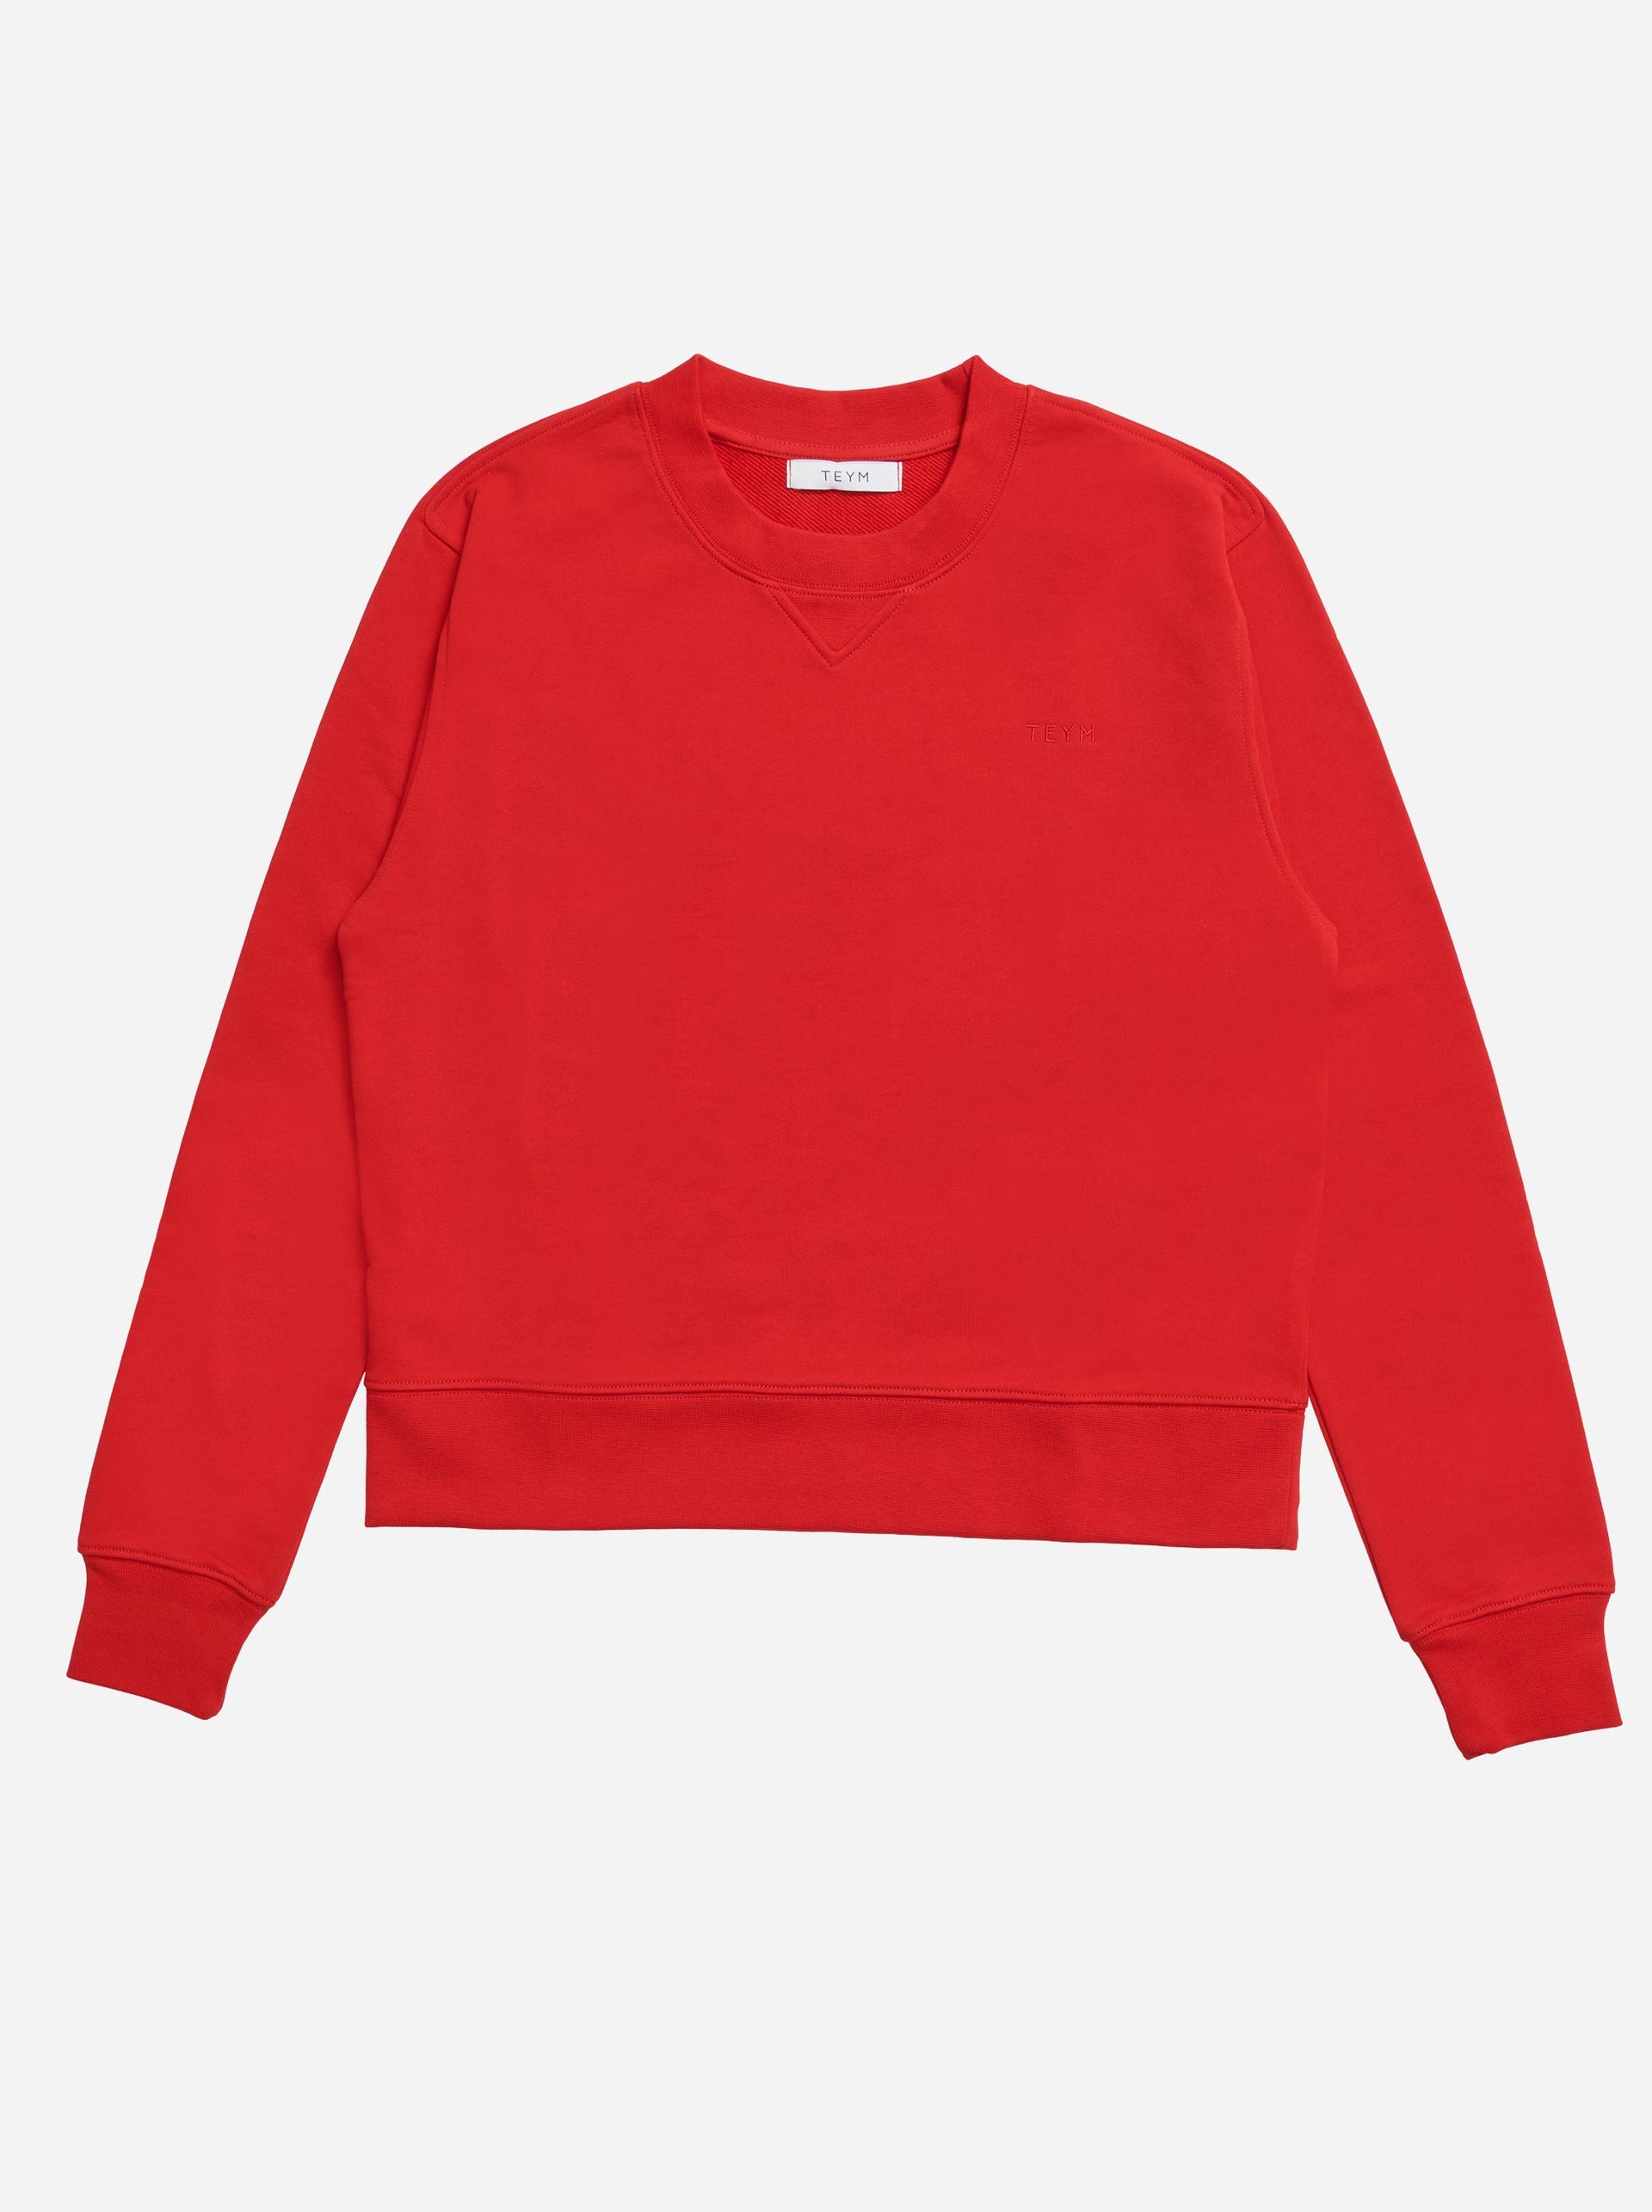 Teym • The Sweatshirt for women • Red • Comfortable and classic fit